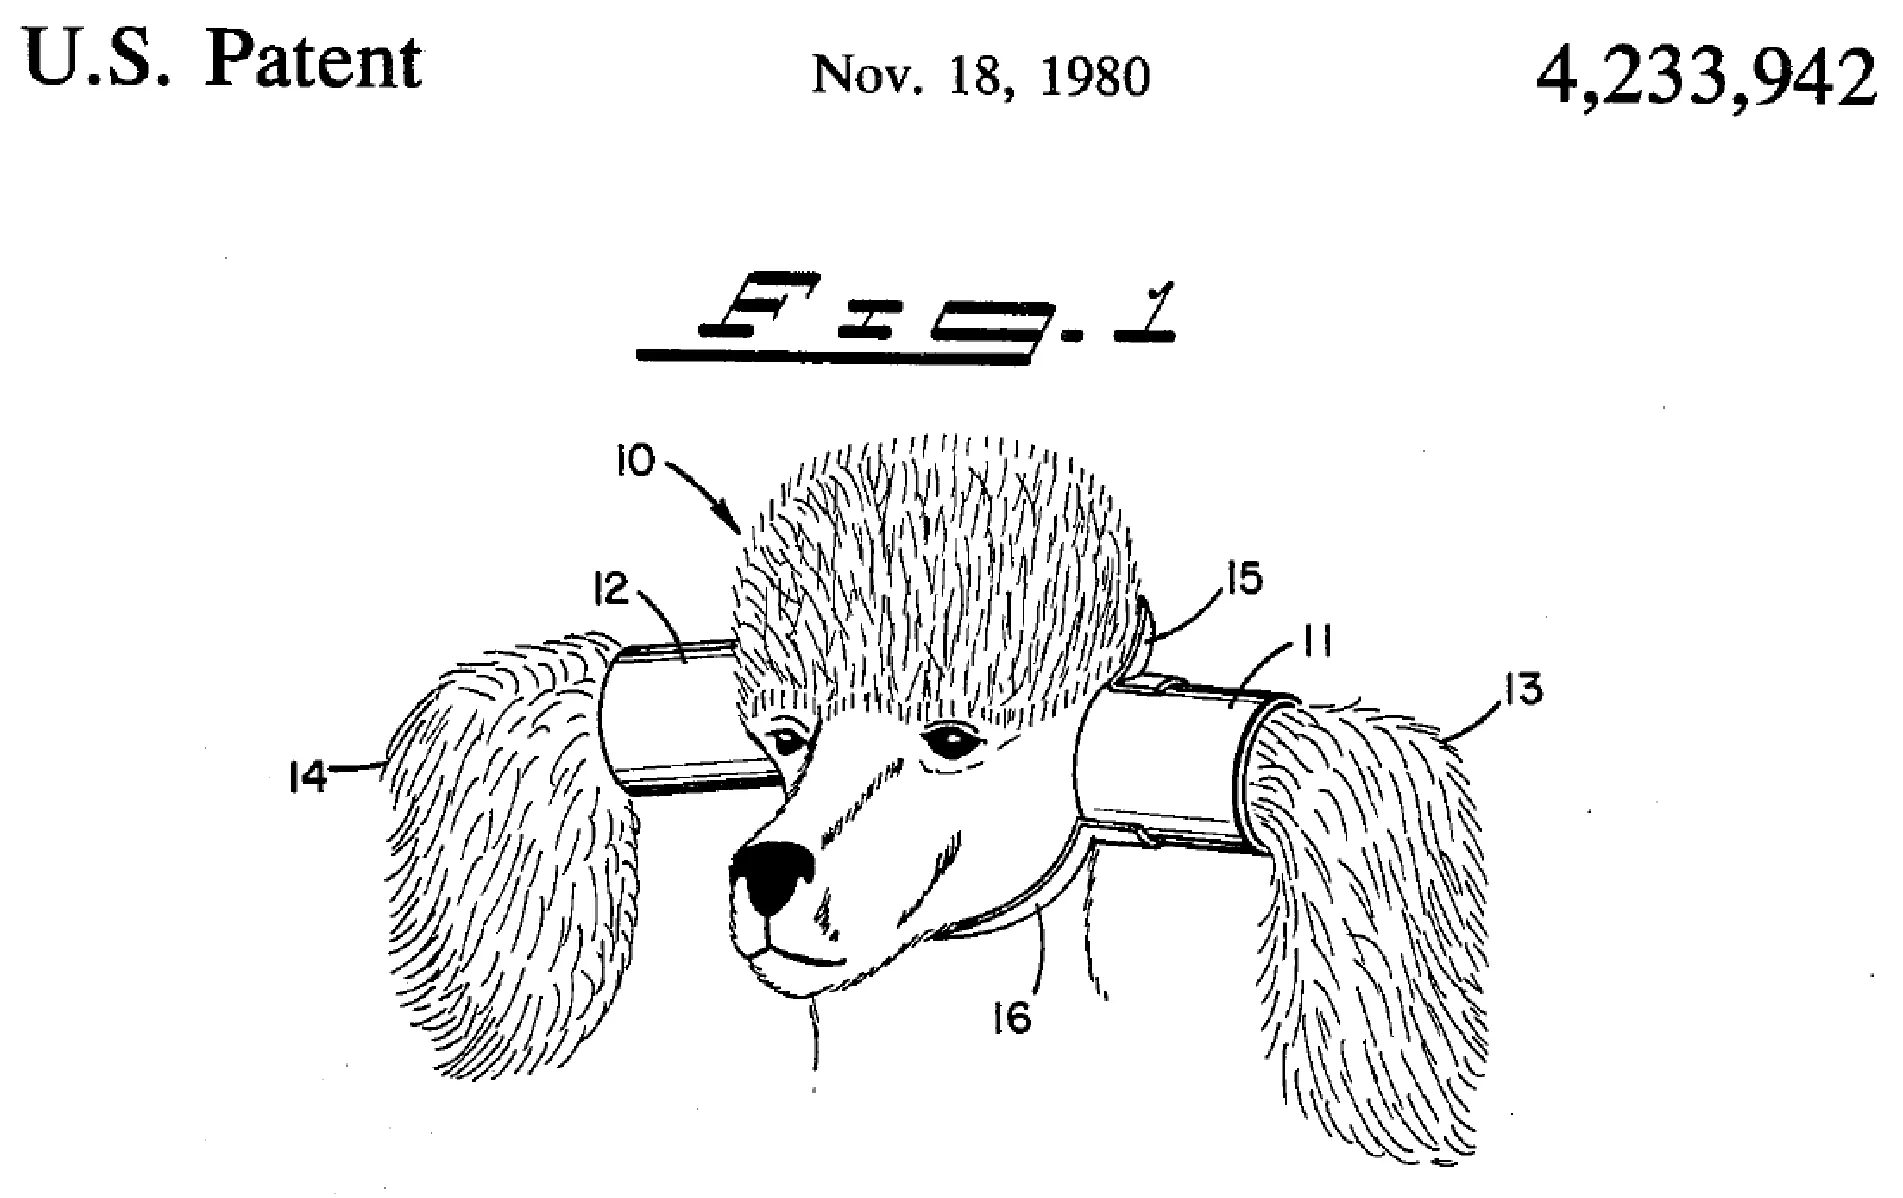 An image of a patent for dog ear protectors. They are cylinders that go around a dogs ears to keep the hair from dangling down. The text indicates that they are designed to keep a dog's hair clean while eating. 